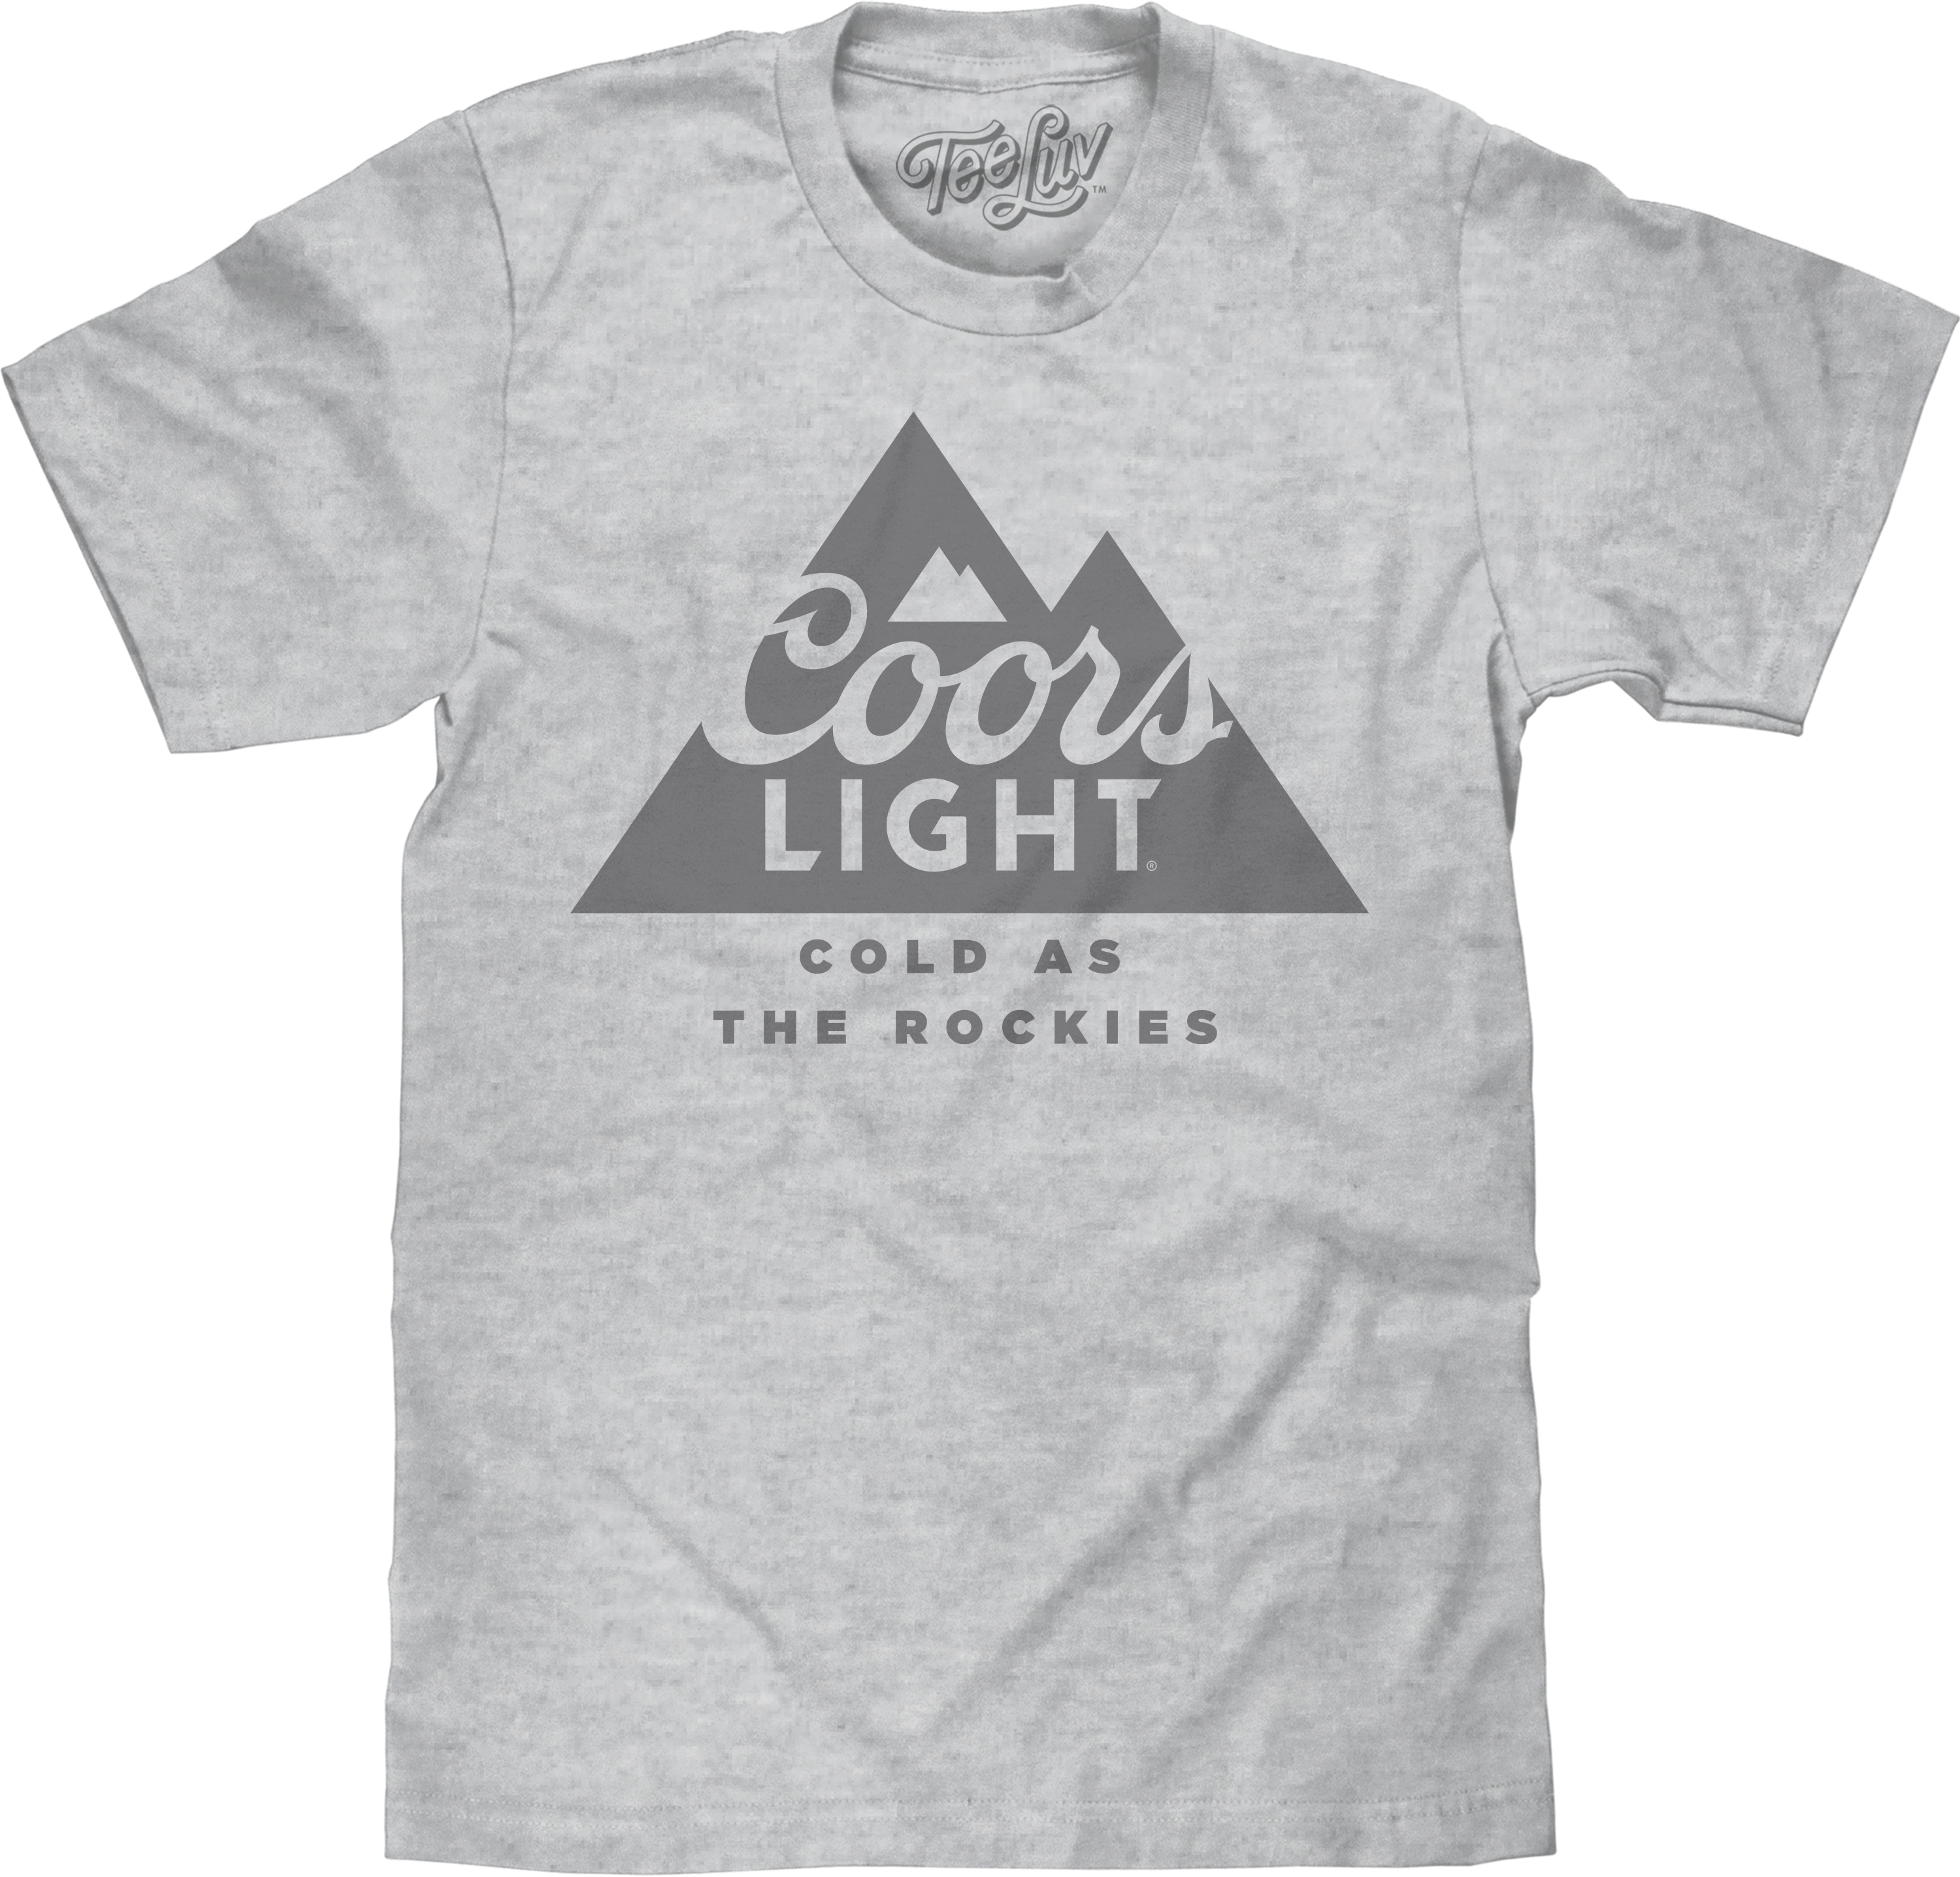 Coors 864315-large Light Cold As The Rockies T-Shirt, Gray - Large